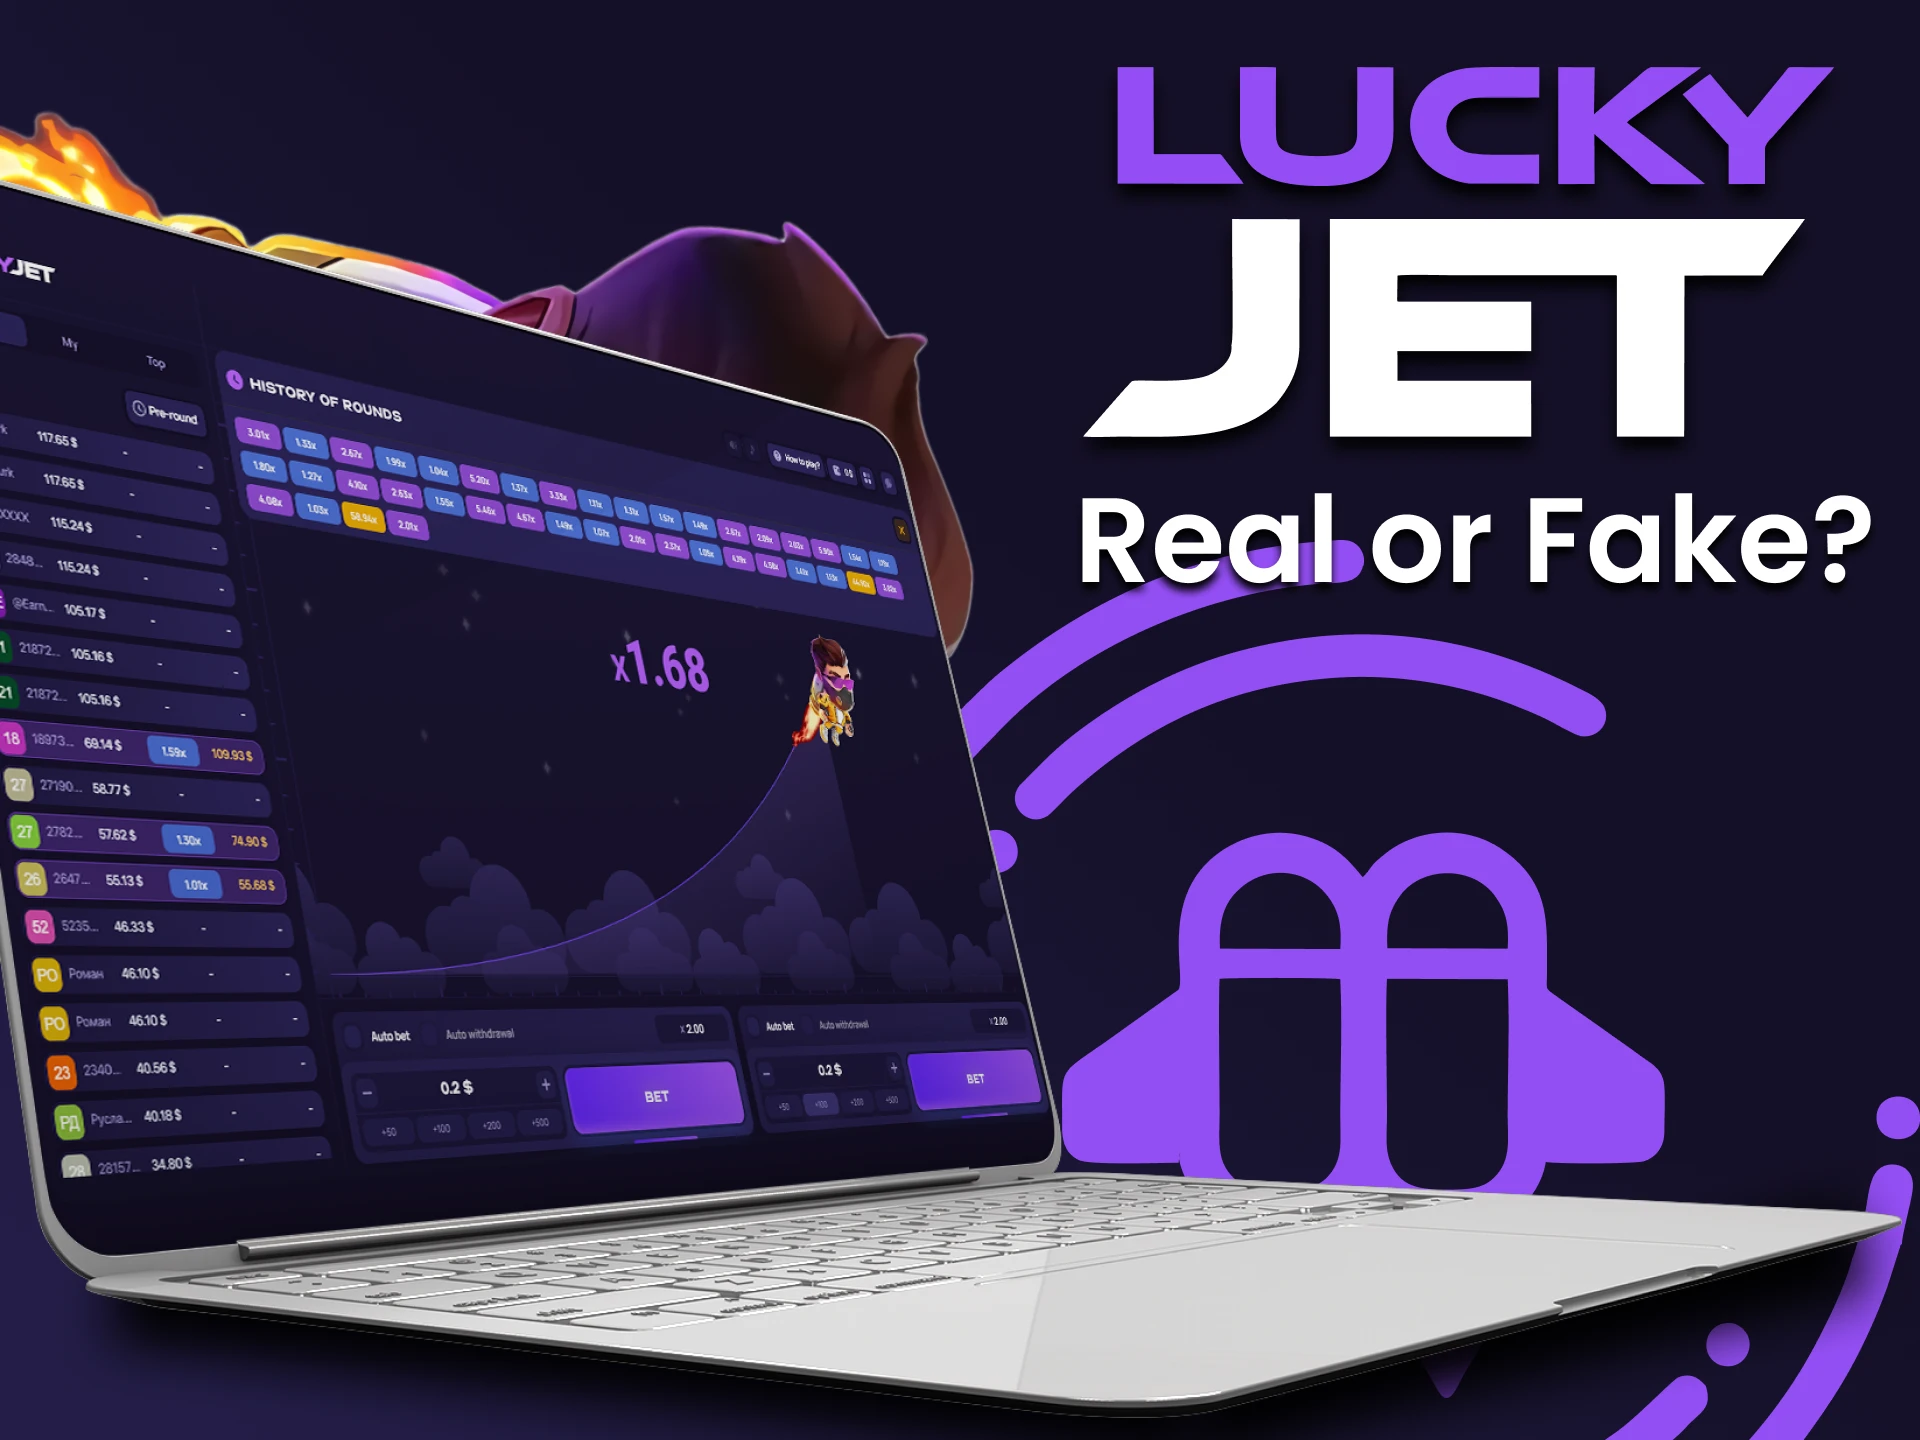 Play Lucky Jet to win.